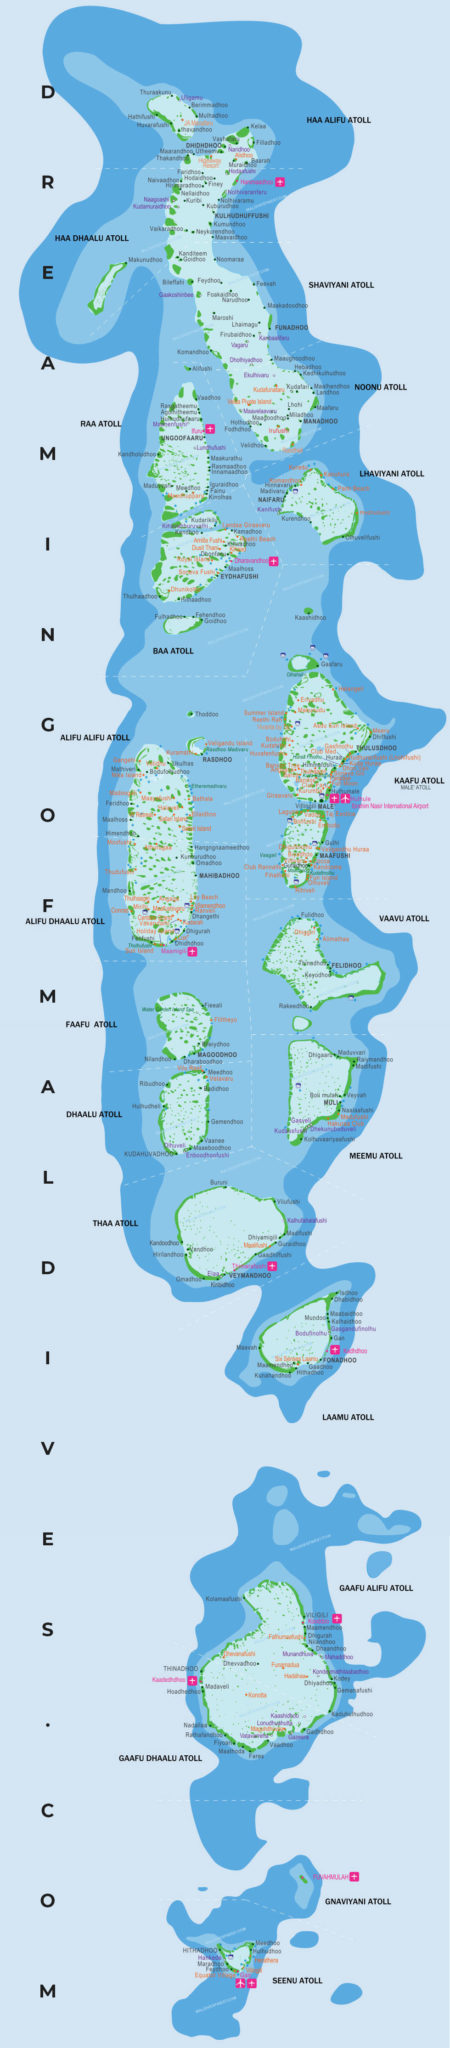 Maldives Islands Map 2020. Locate your favorite Resort on the Map